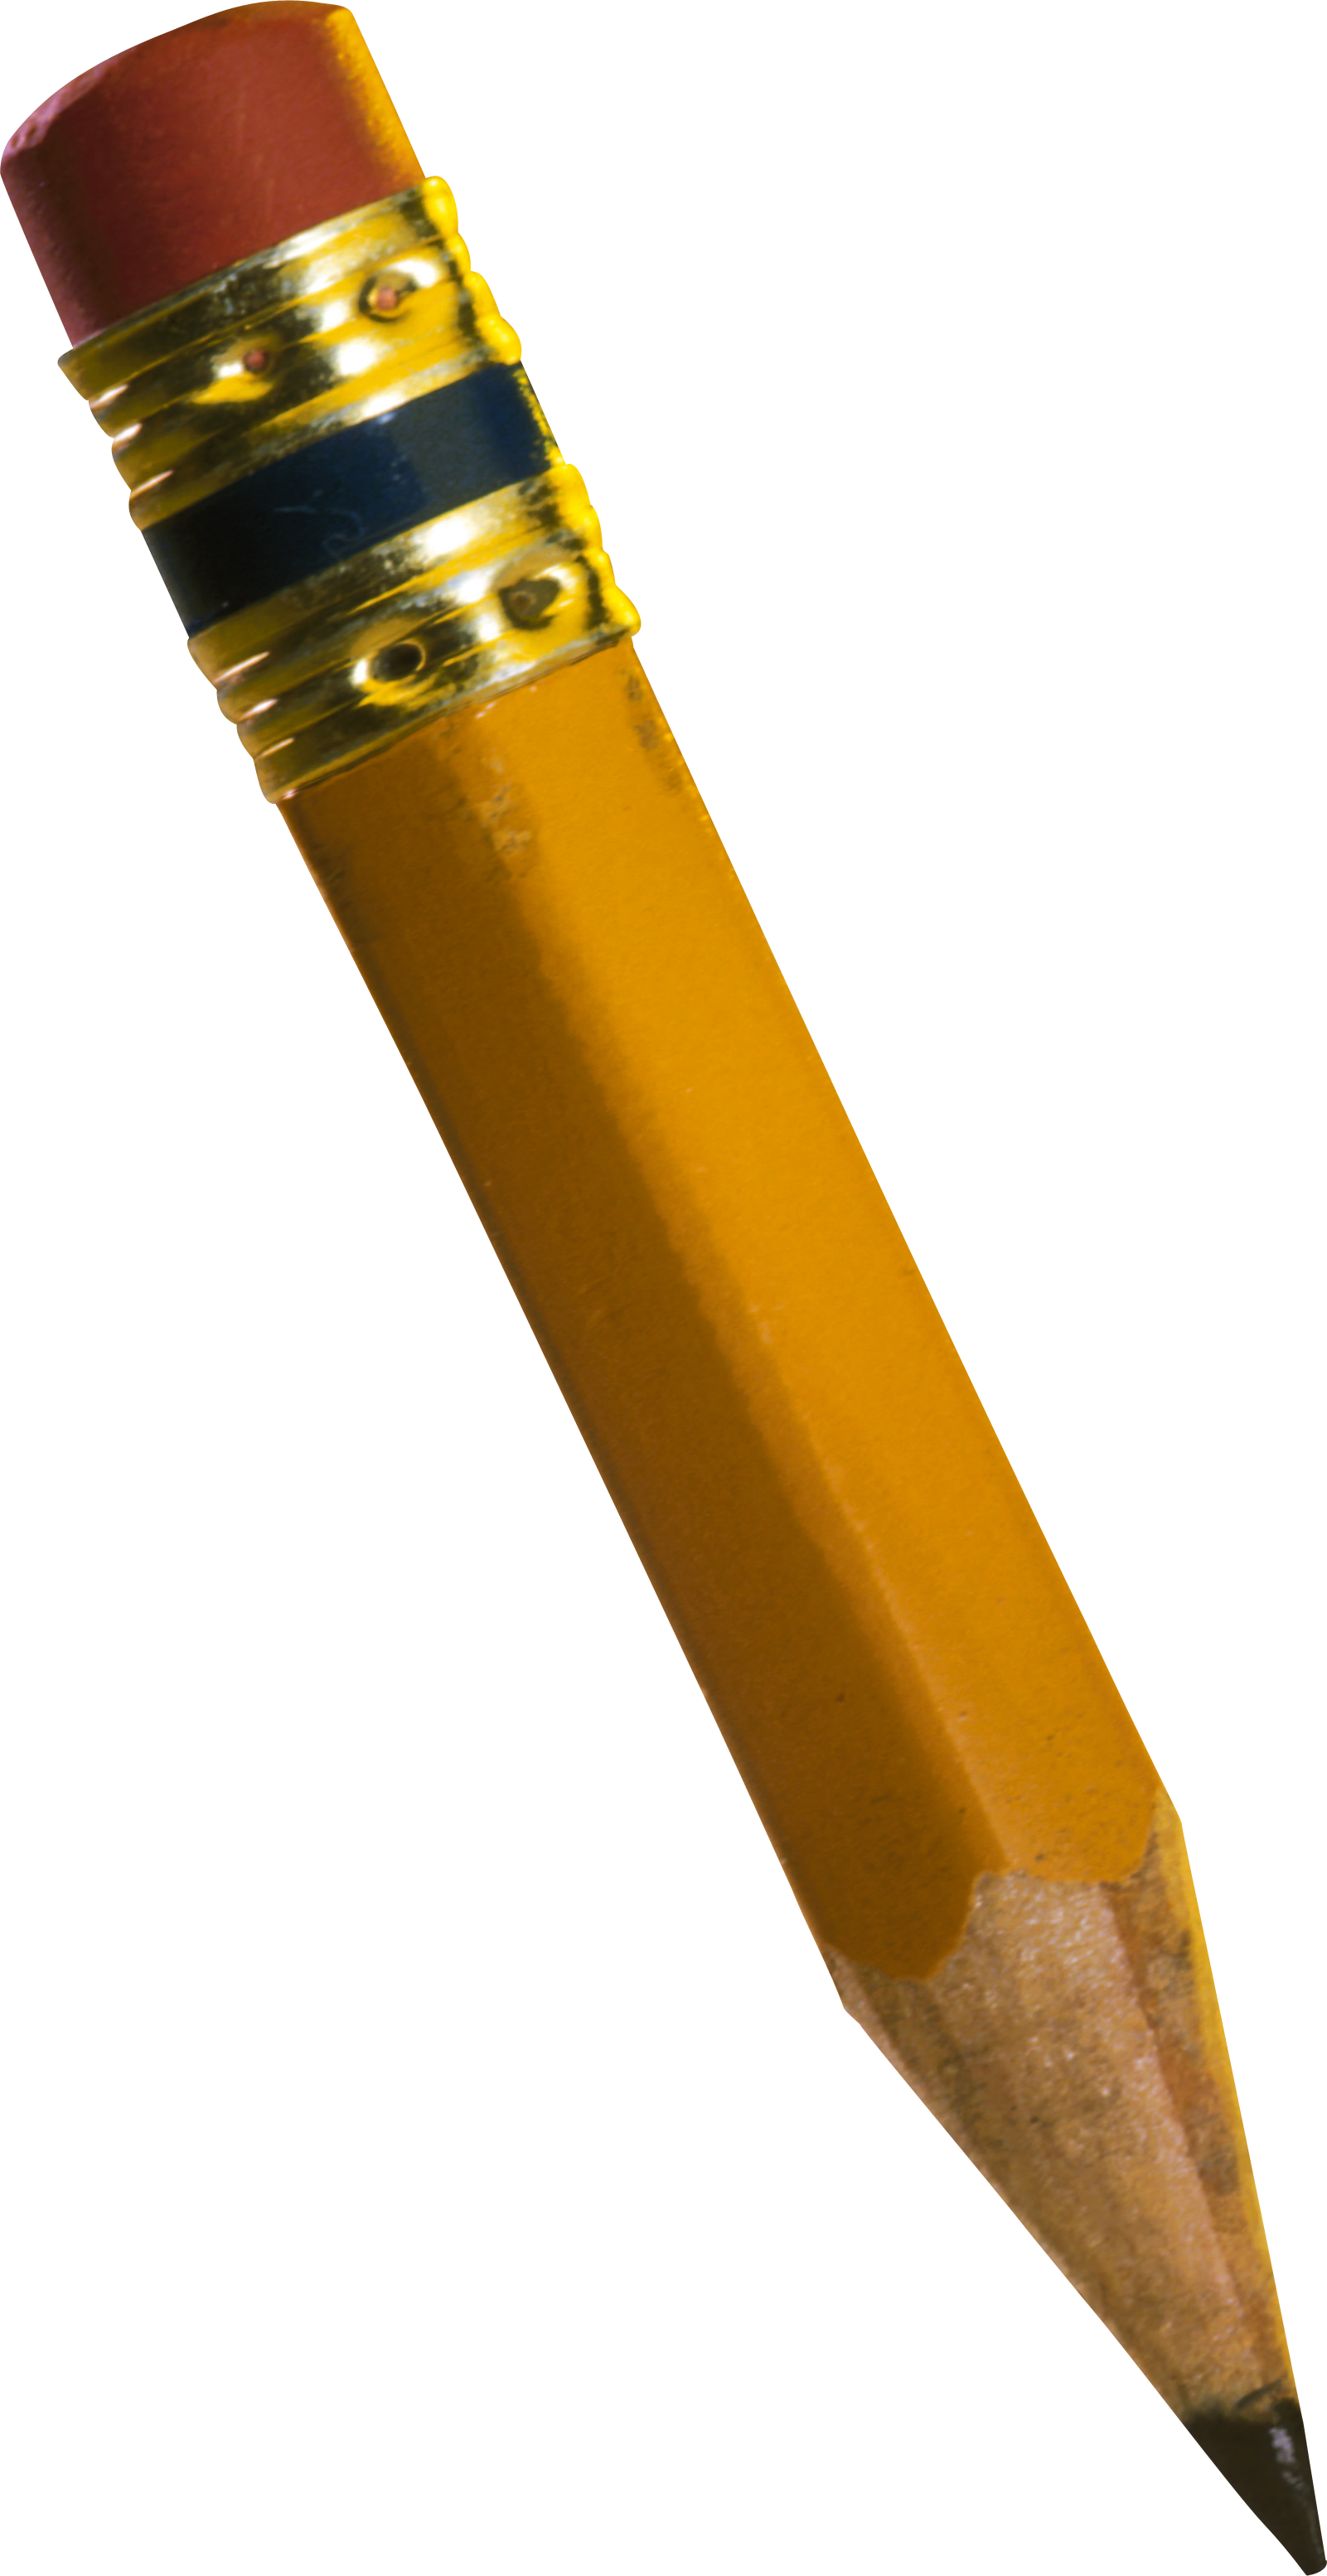 Tip Of Pencil PNG - 57074